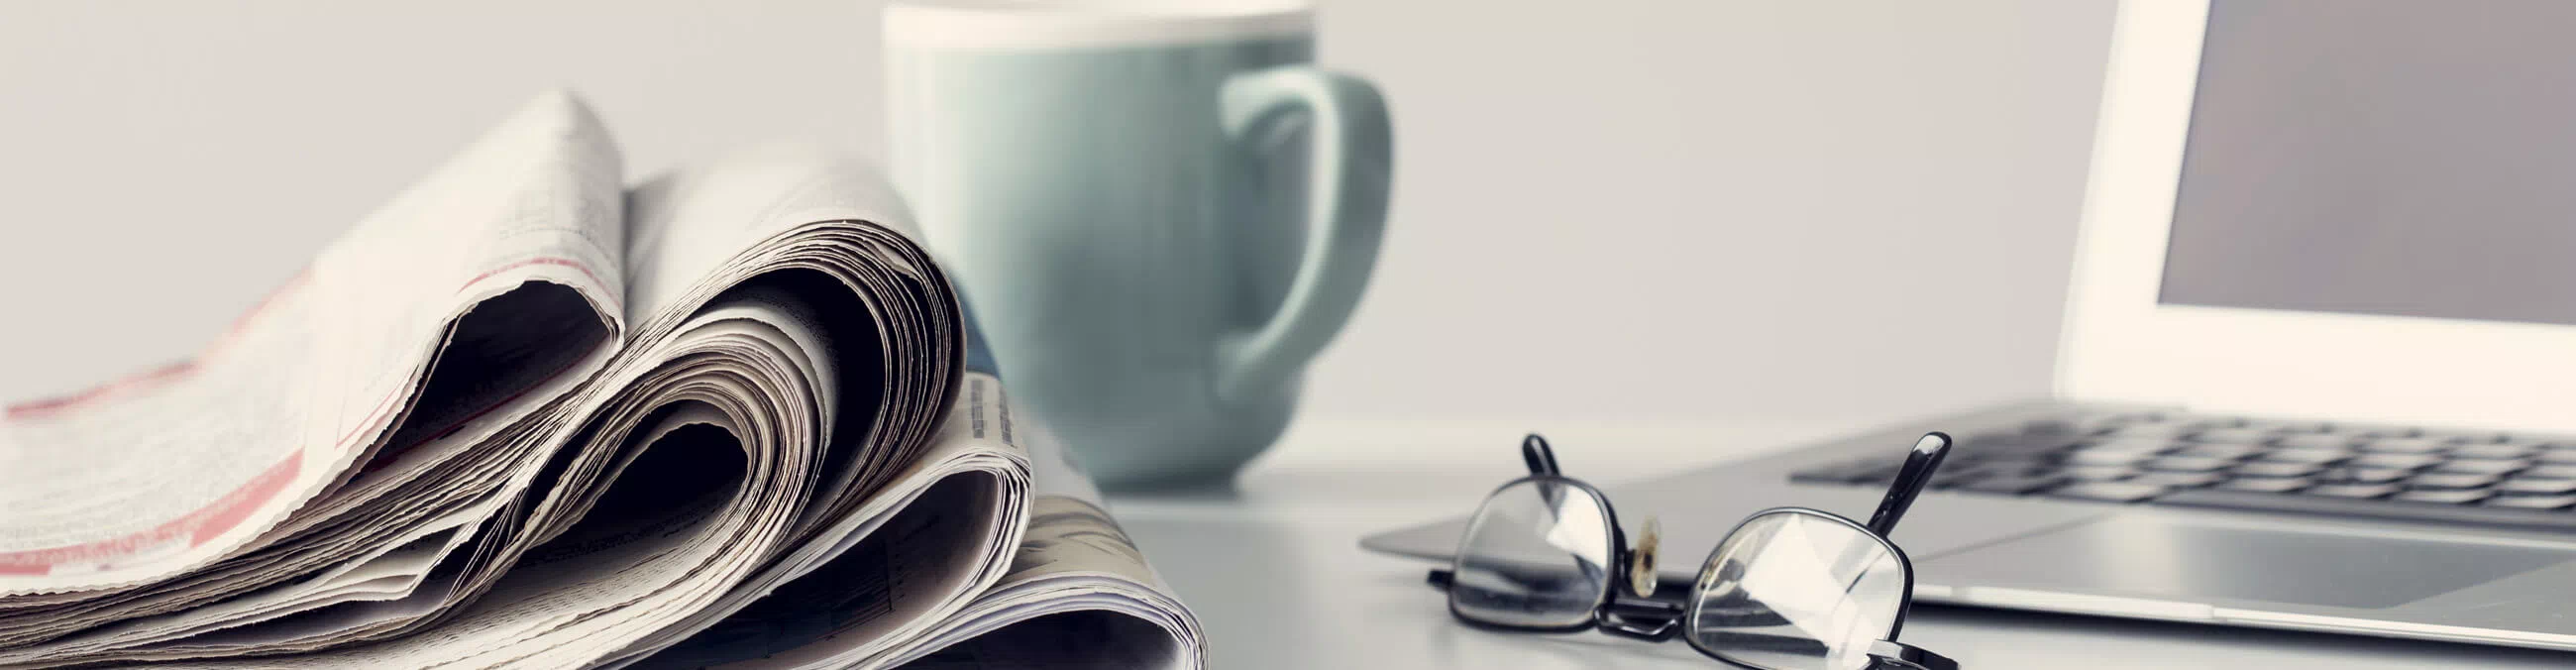 newspapers, reading glasses, a pen, and a cup of coffee on a table